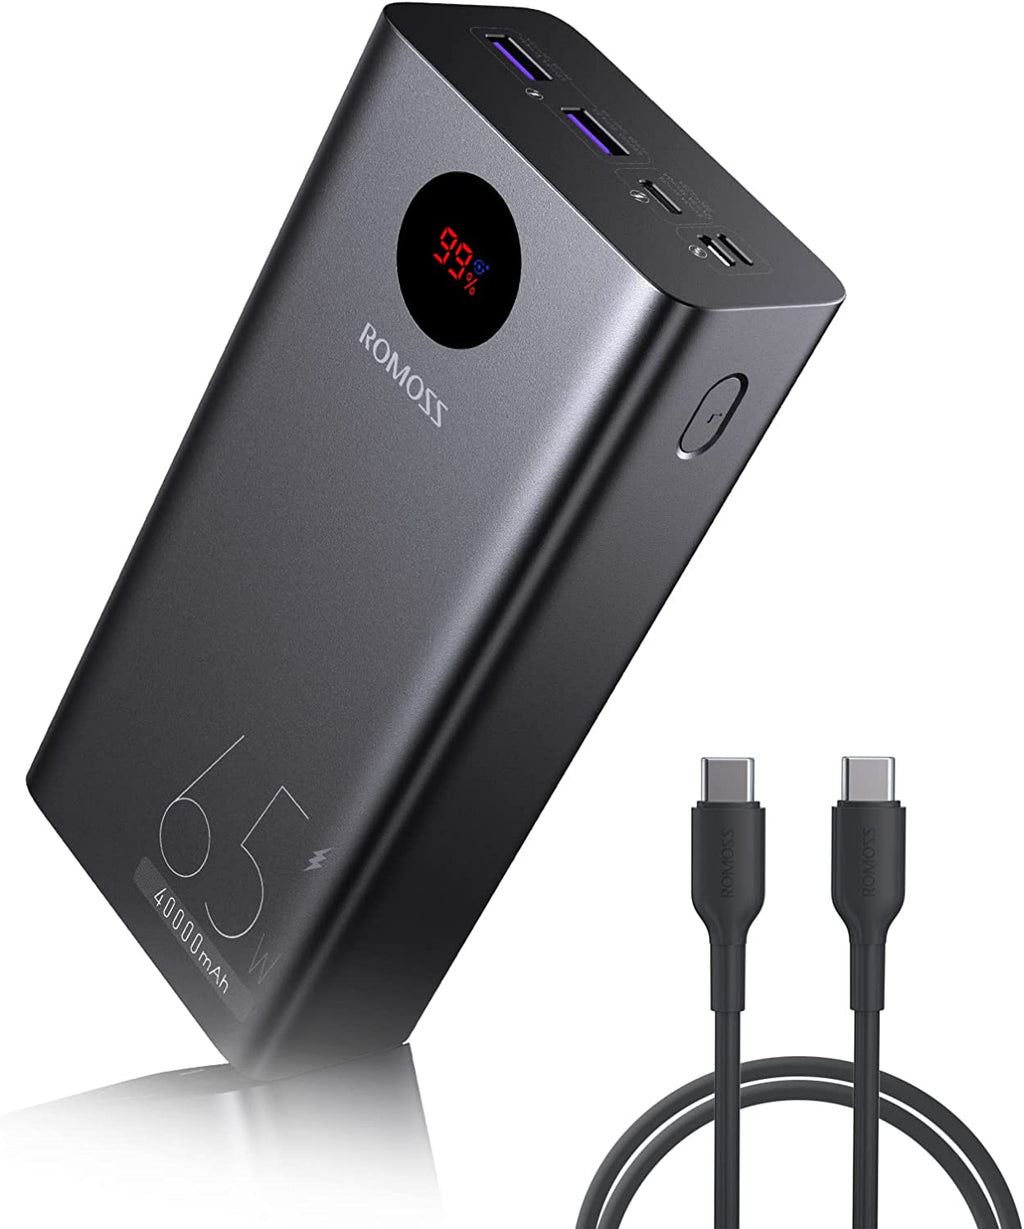  [AUSTRALIA] - USB C Laptop Power Bank - ROMOSS 50W MAX PD 20000mAh Portable Fast Charger Battery Pack with LED Display for MacBook Air/Pro/Dell XPS/Surface Pro 7, iPhone 12/11/Pro/XS Max/X/8/Samsung S21 Black